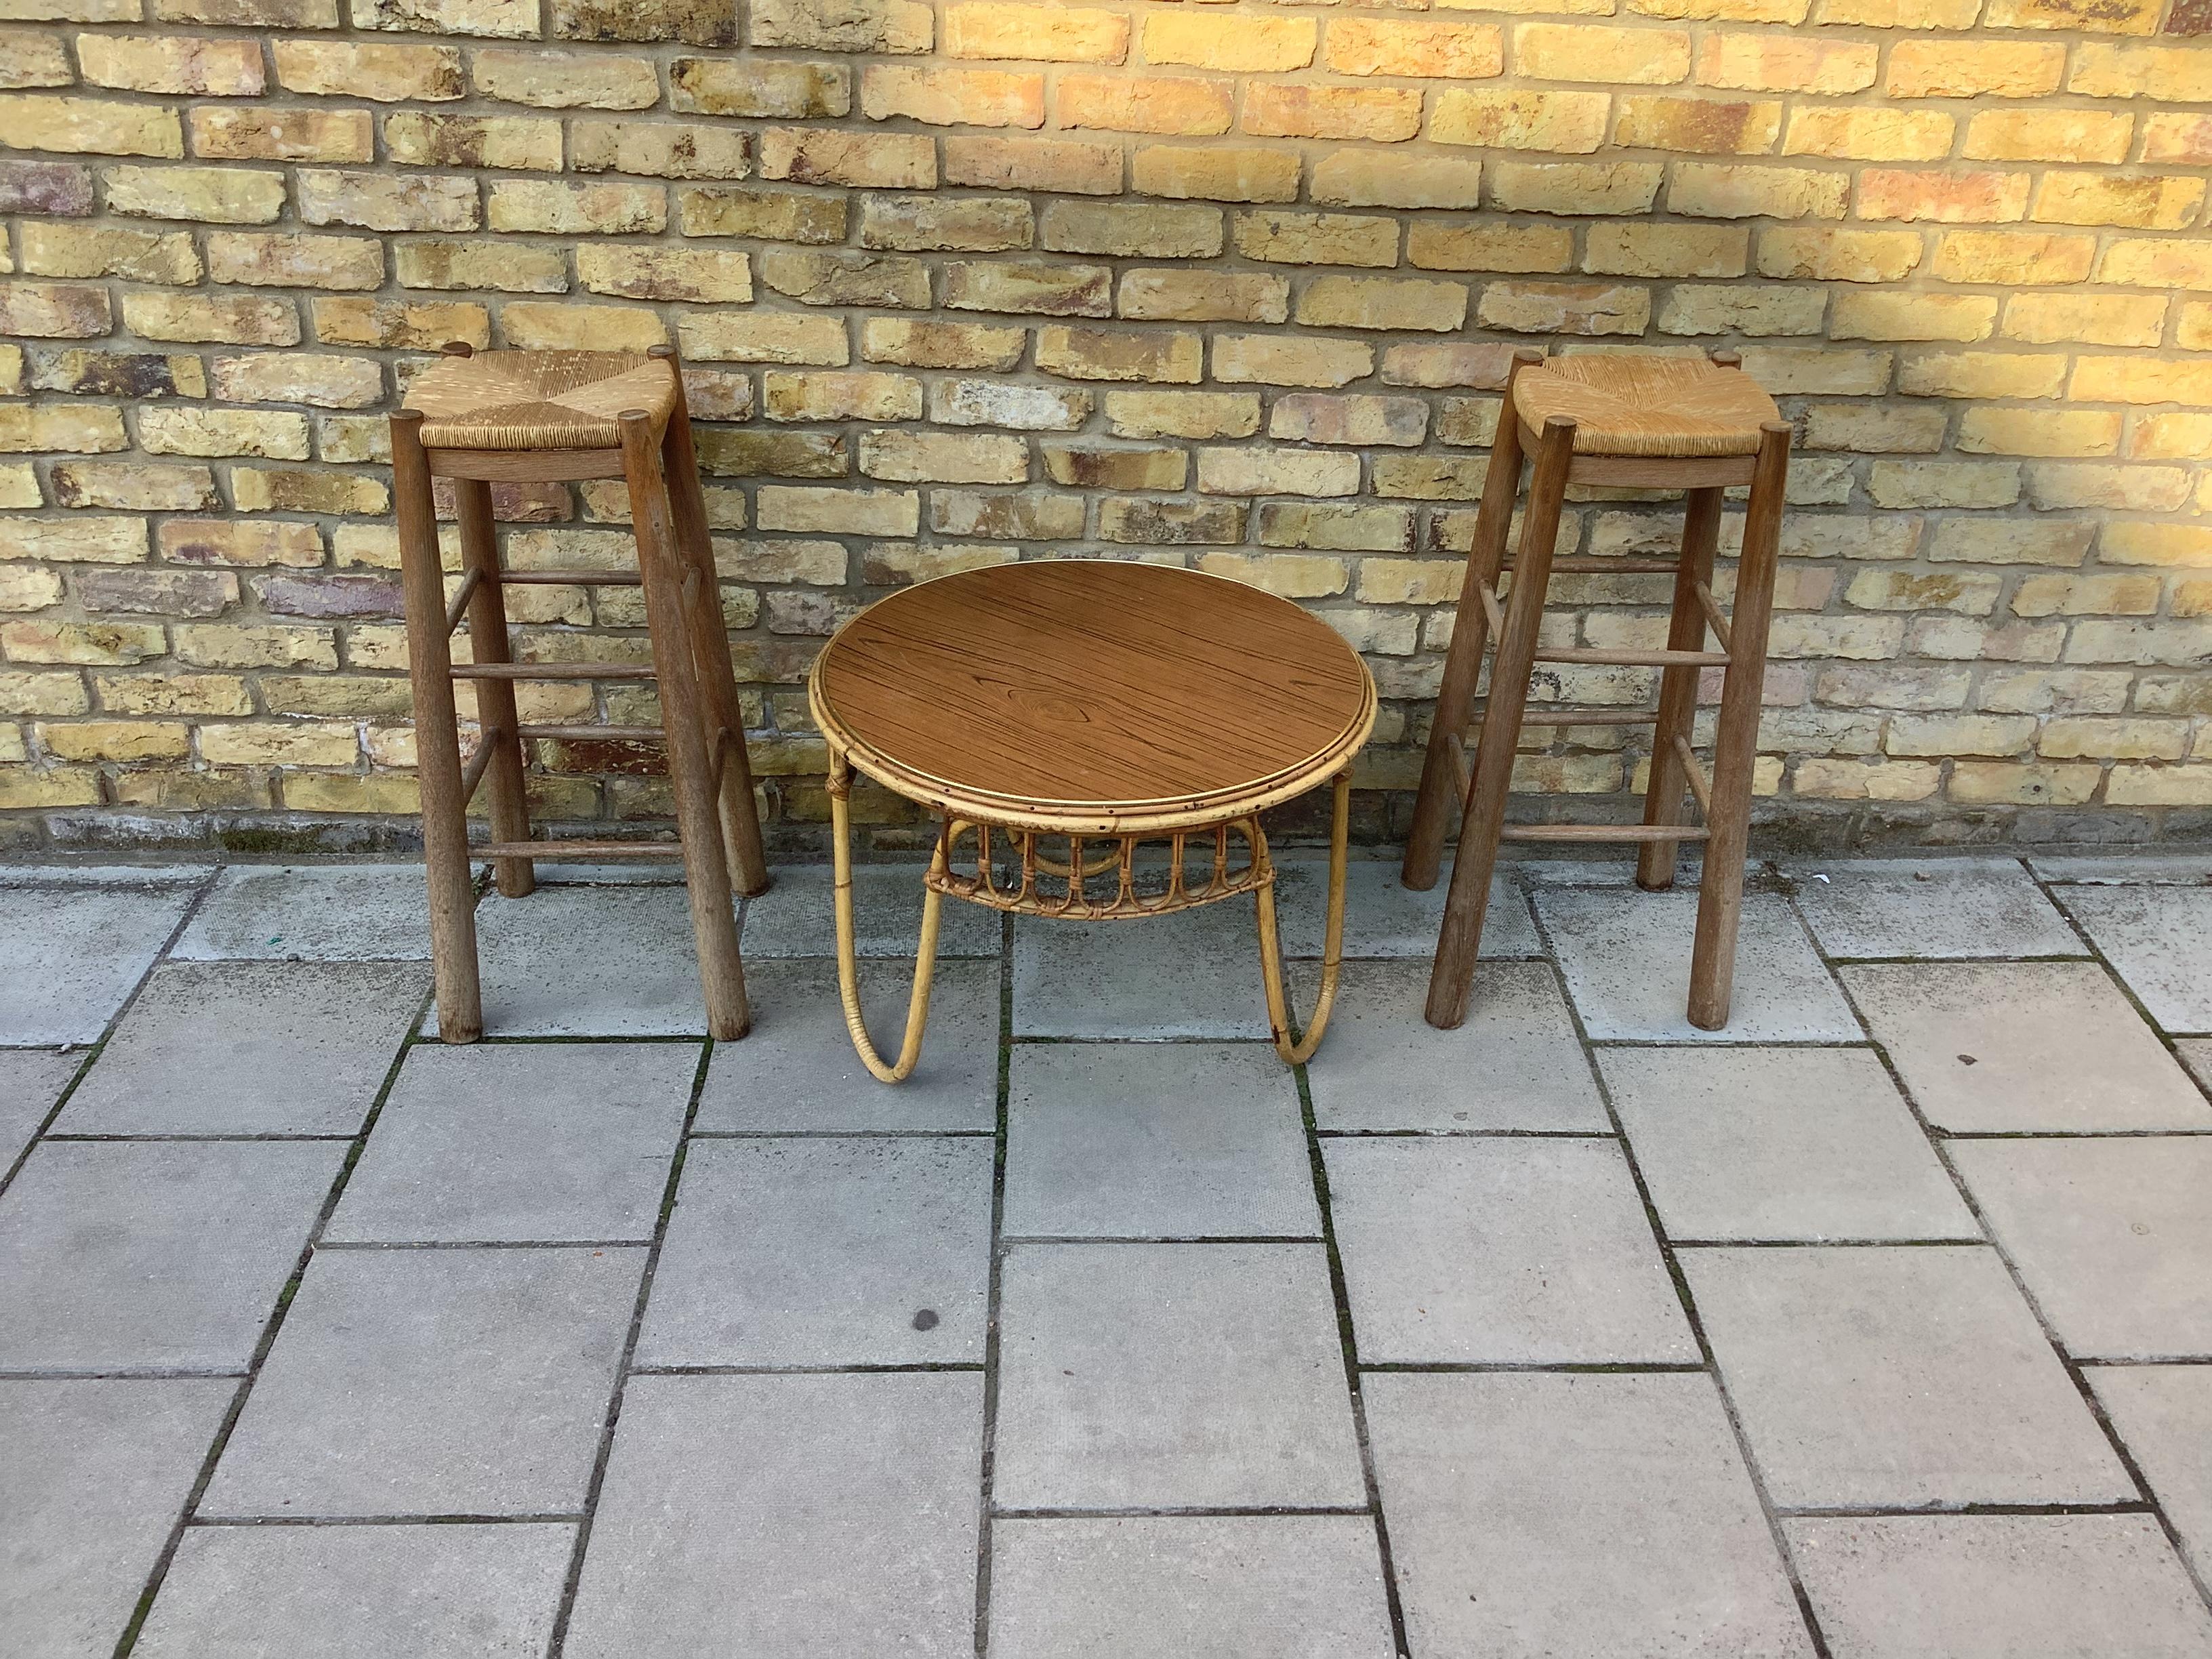 A pair of French stools with beautiful natural woven seating.

